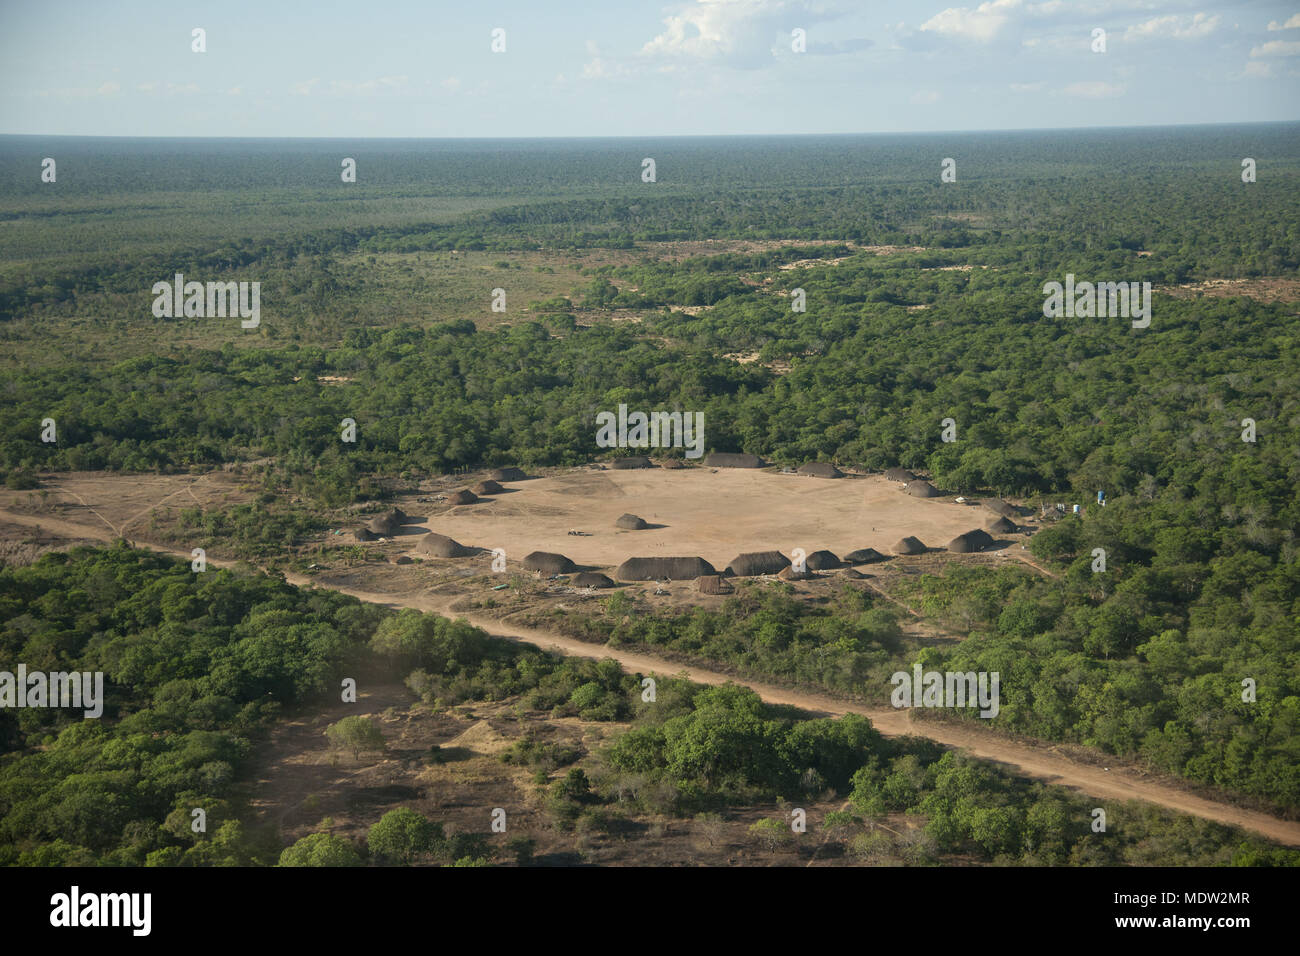 Aerial view of the village Aiha - Kalapalo ethnicity - the Xingu Indigenous Park Stock Photo